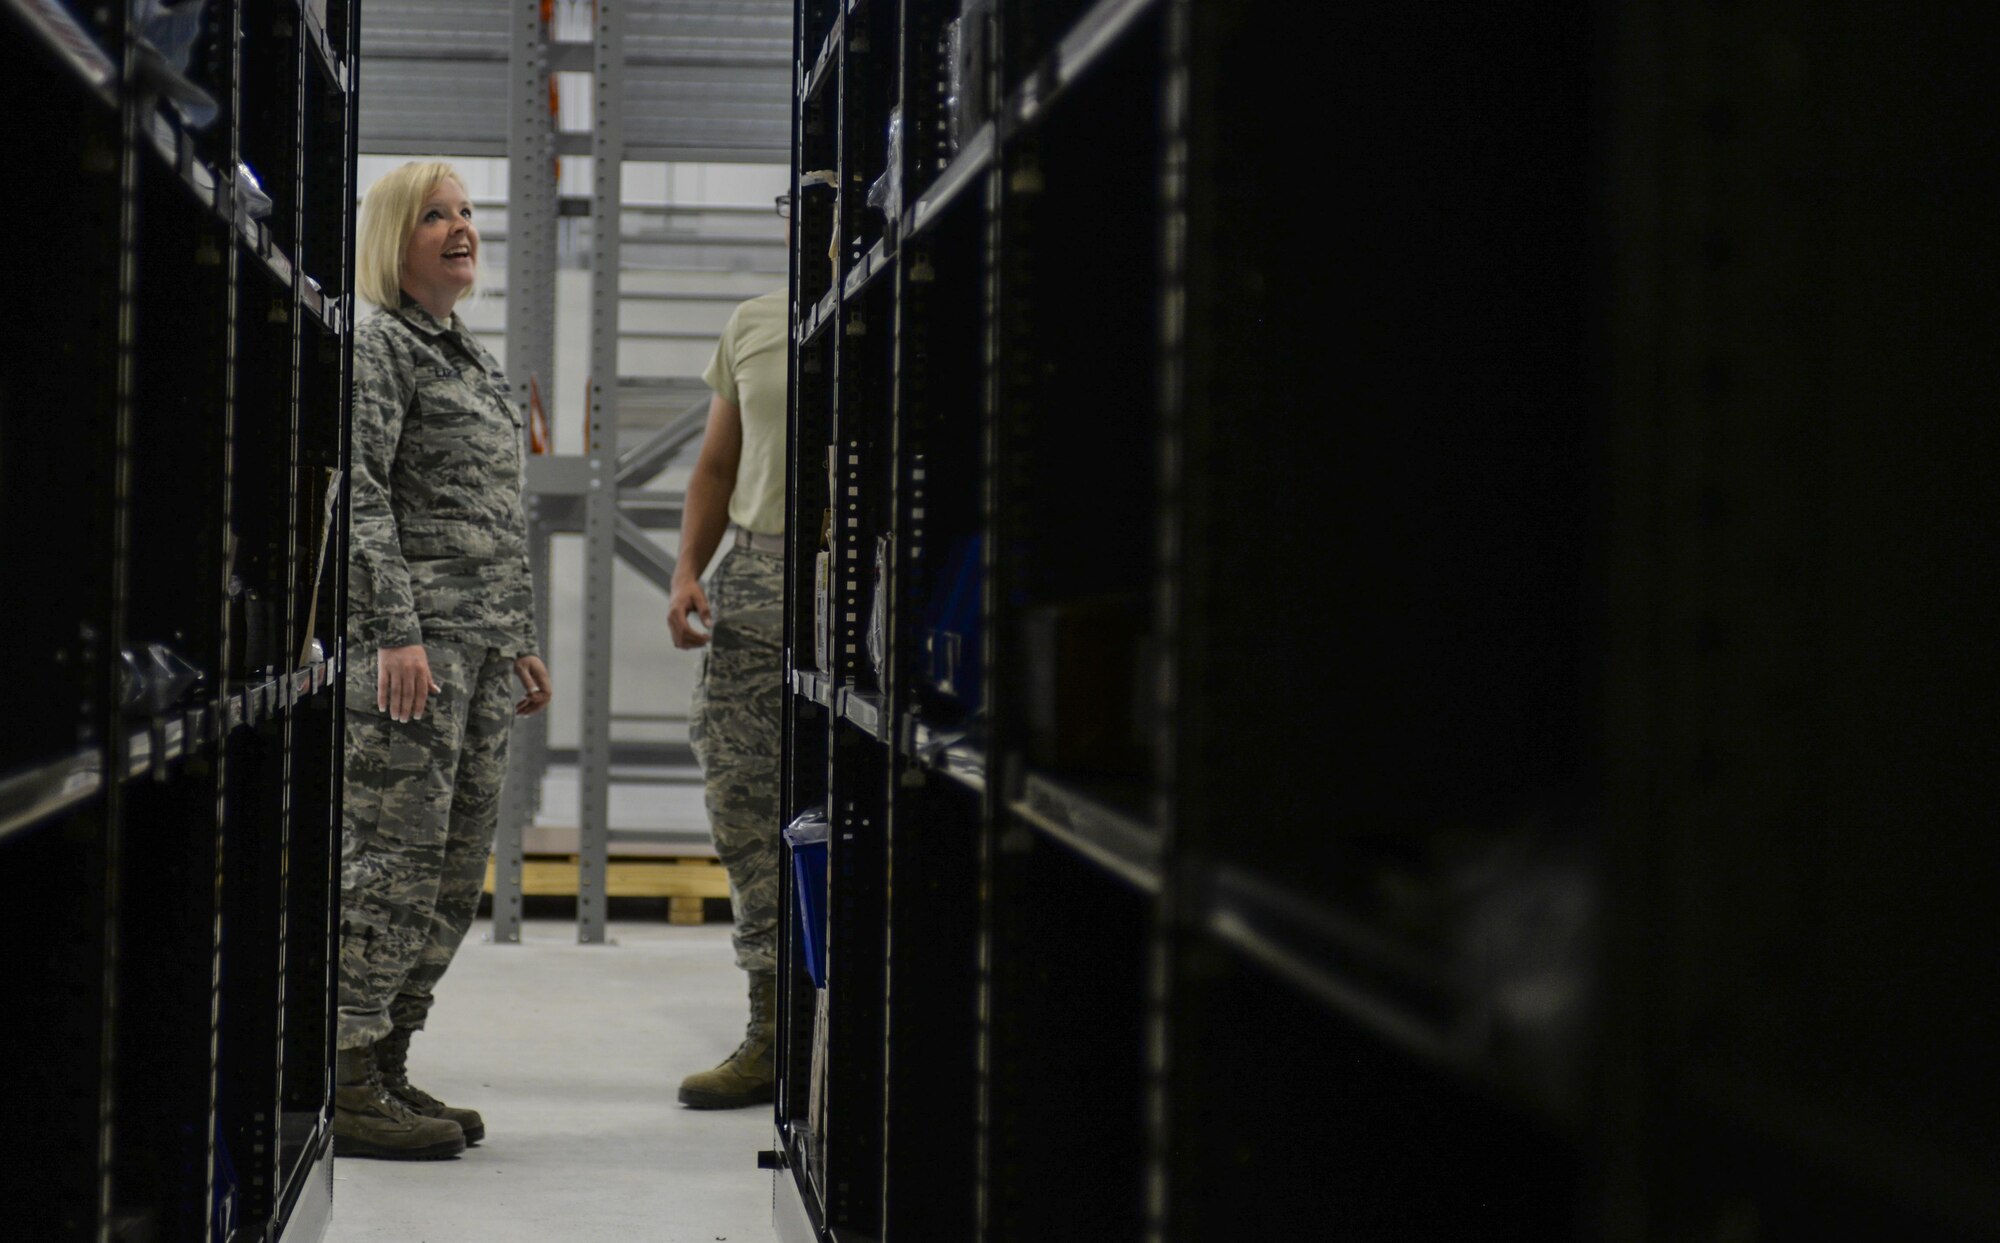 Tech. Sgt. Tiffany Larson, 99th LRS NCO in charge of F-35 aircraft parts store, surveys the shelves of the new location that the F-35 parts store will be working out of at Nellis Air Force Base, Nev., June 6, 2016. With the Air Force’s growing F-35 program, it is essential to supply the shops that support the airframe with the facilities necessary to perform at their highest potential. (U.S. Air Force photo by Airman 1st Class Kevin Tanenbaum)